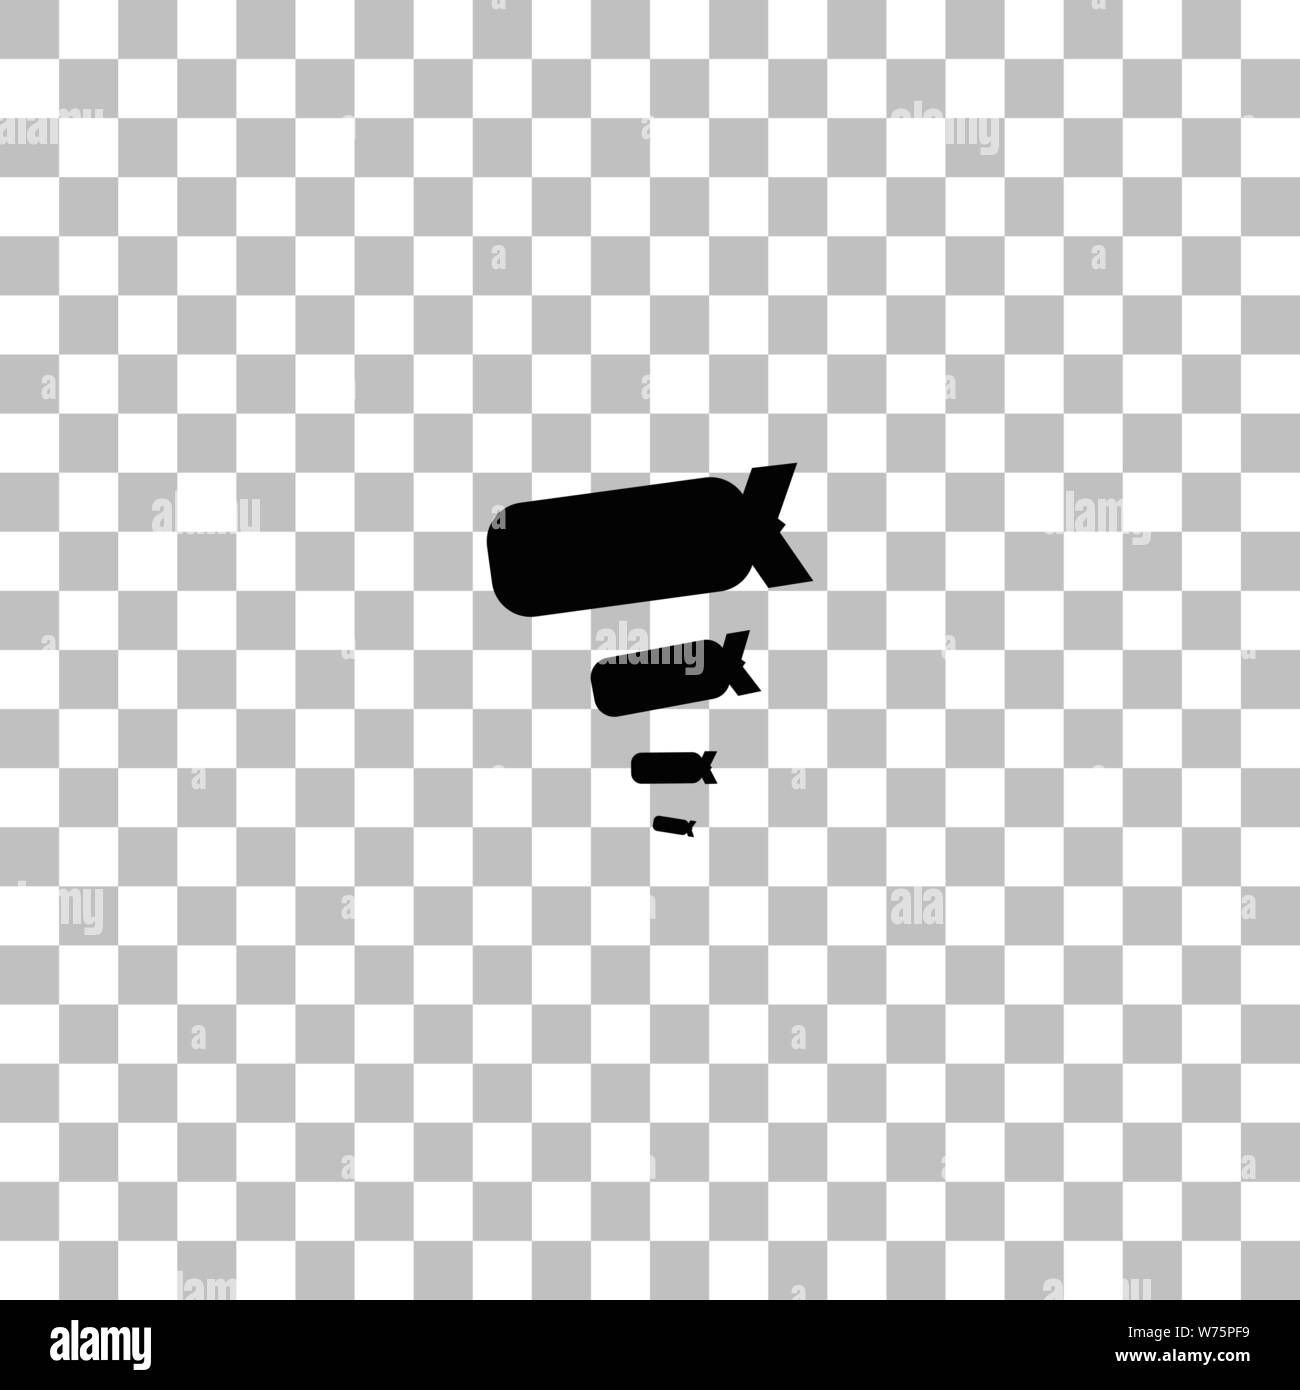 Bombing. Black flat icon on a transparent background. Pictogram for your project Stock Vector